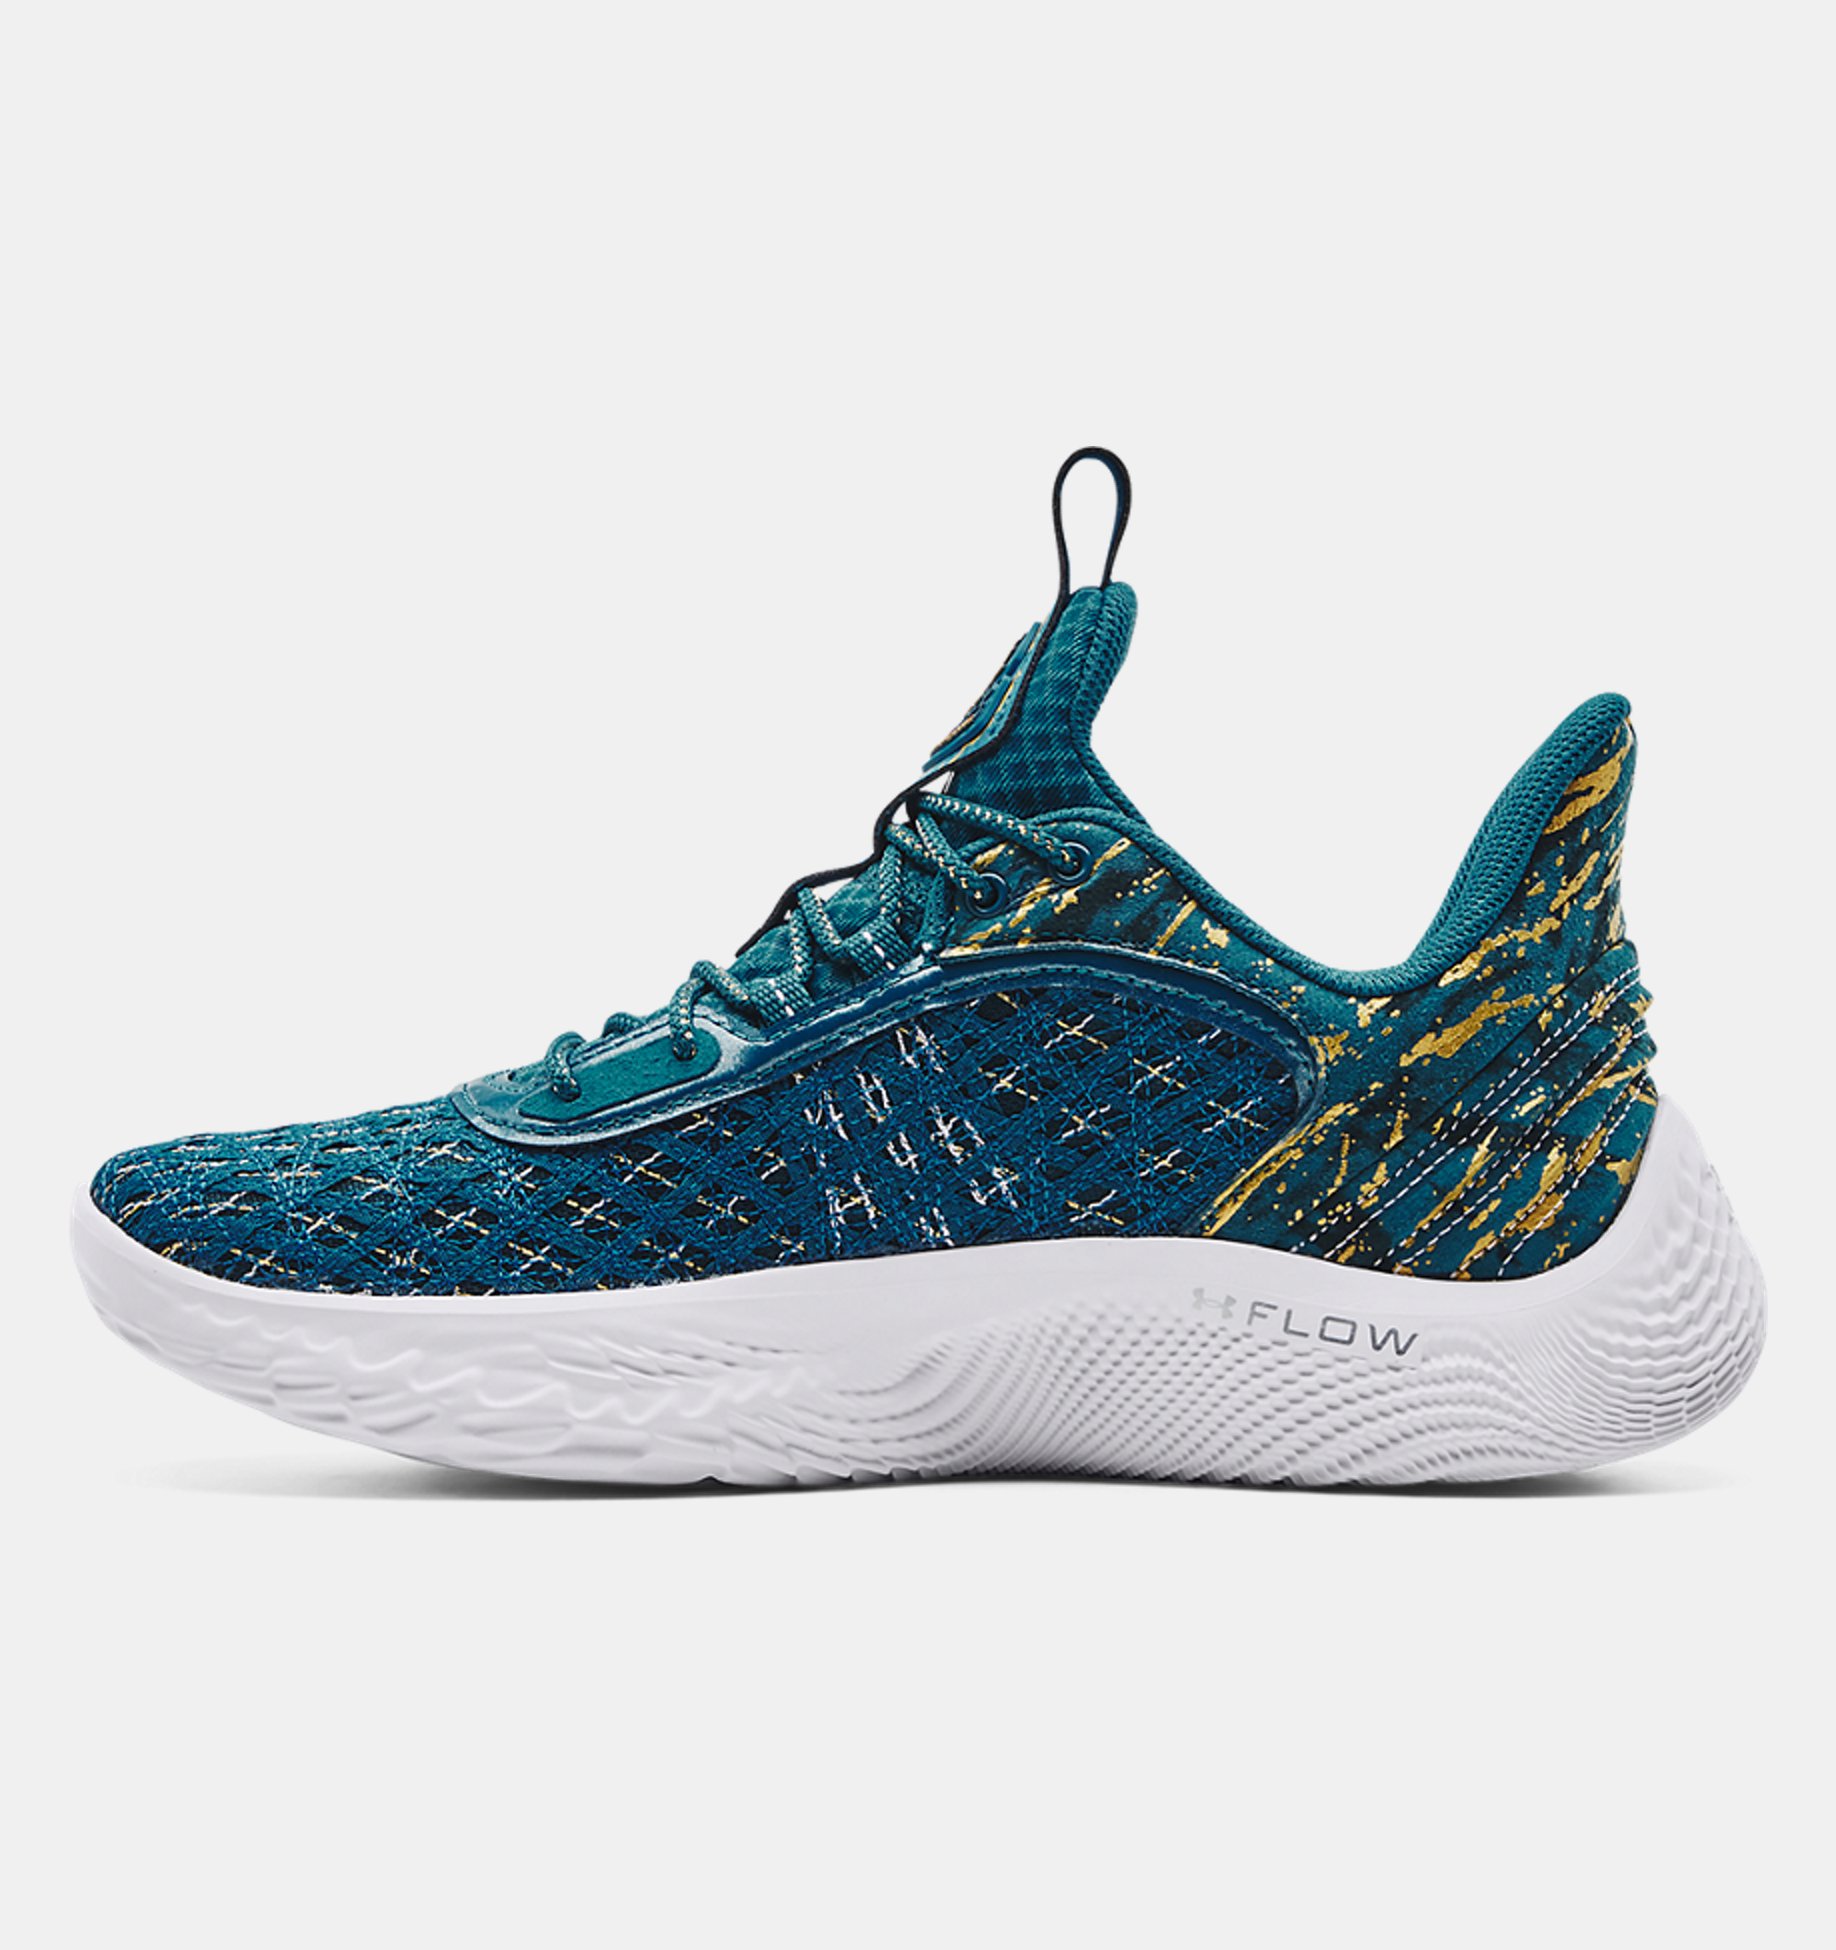 Unisex Curry Flow 9 '2974' Basketball Shoes | Under Armour